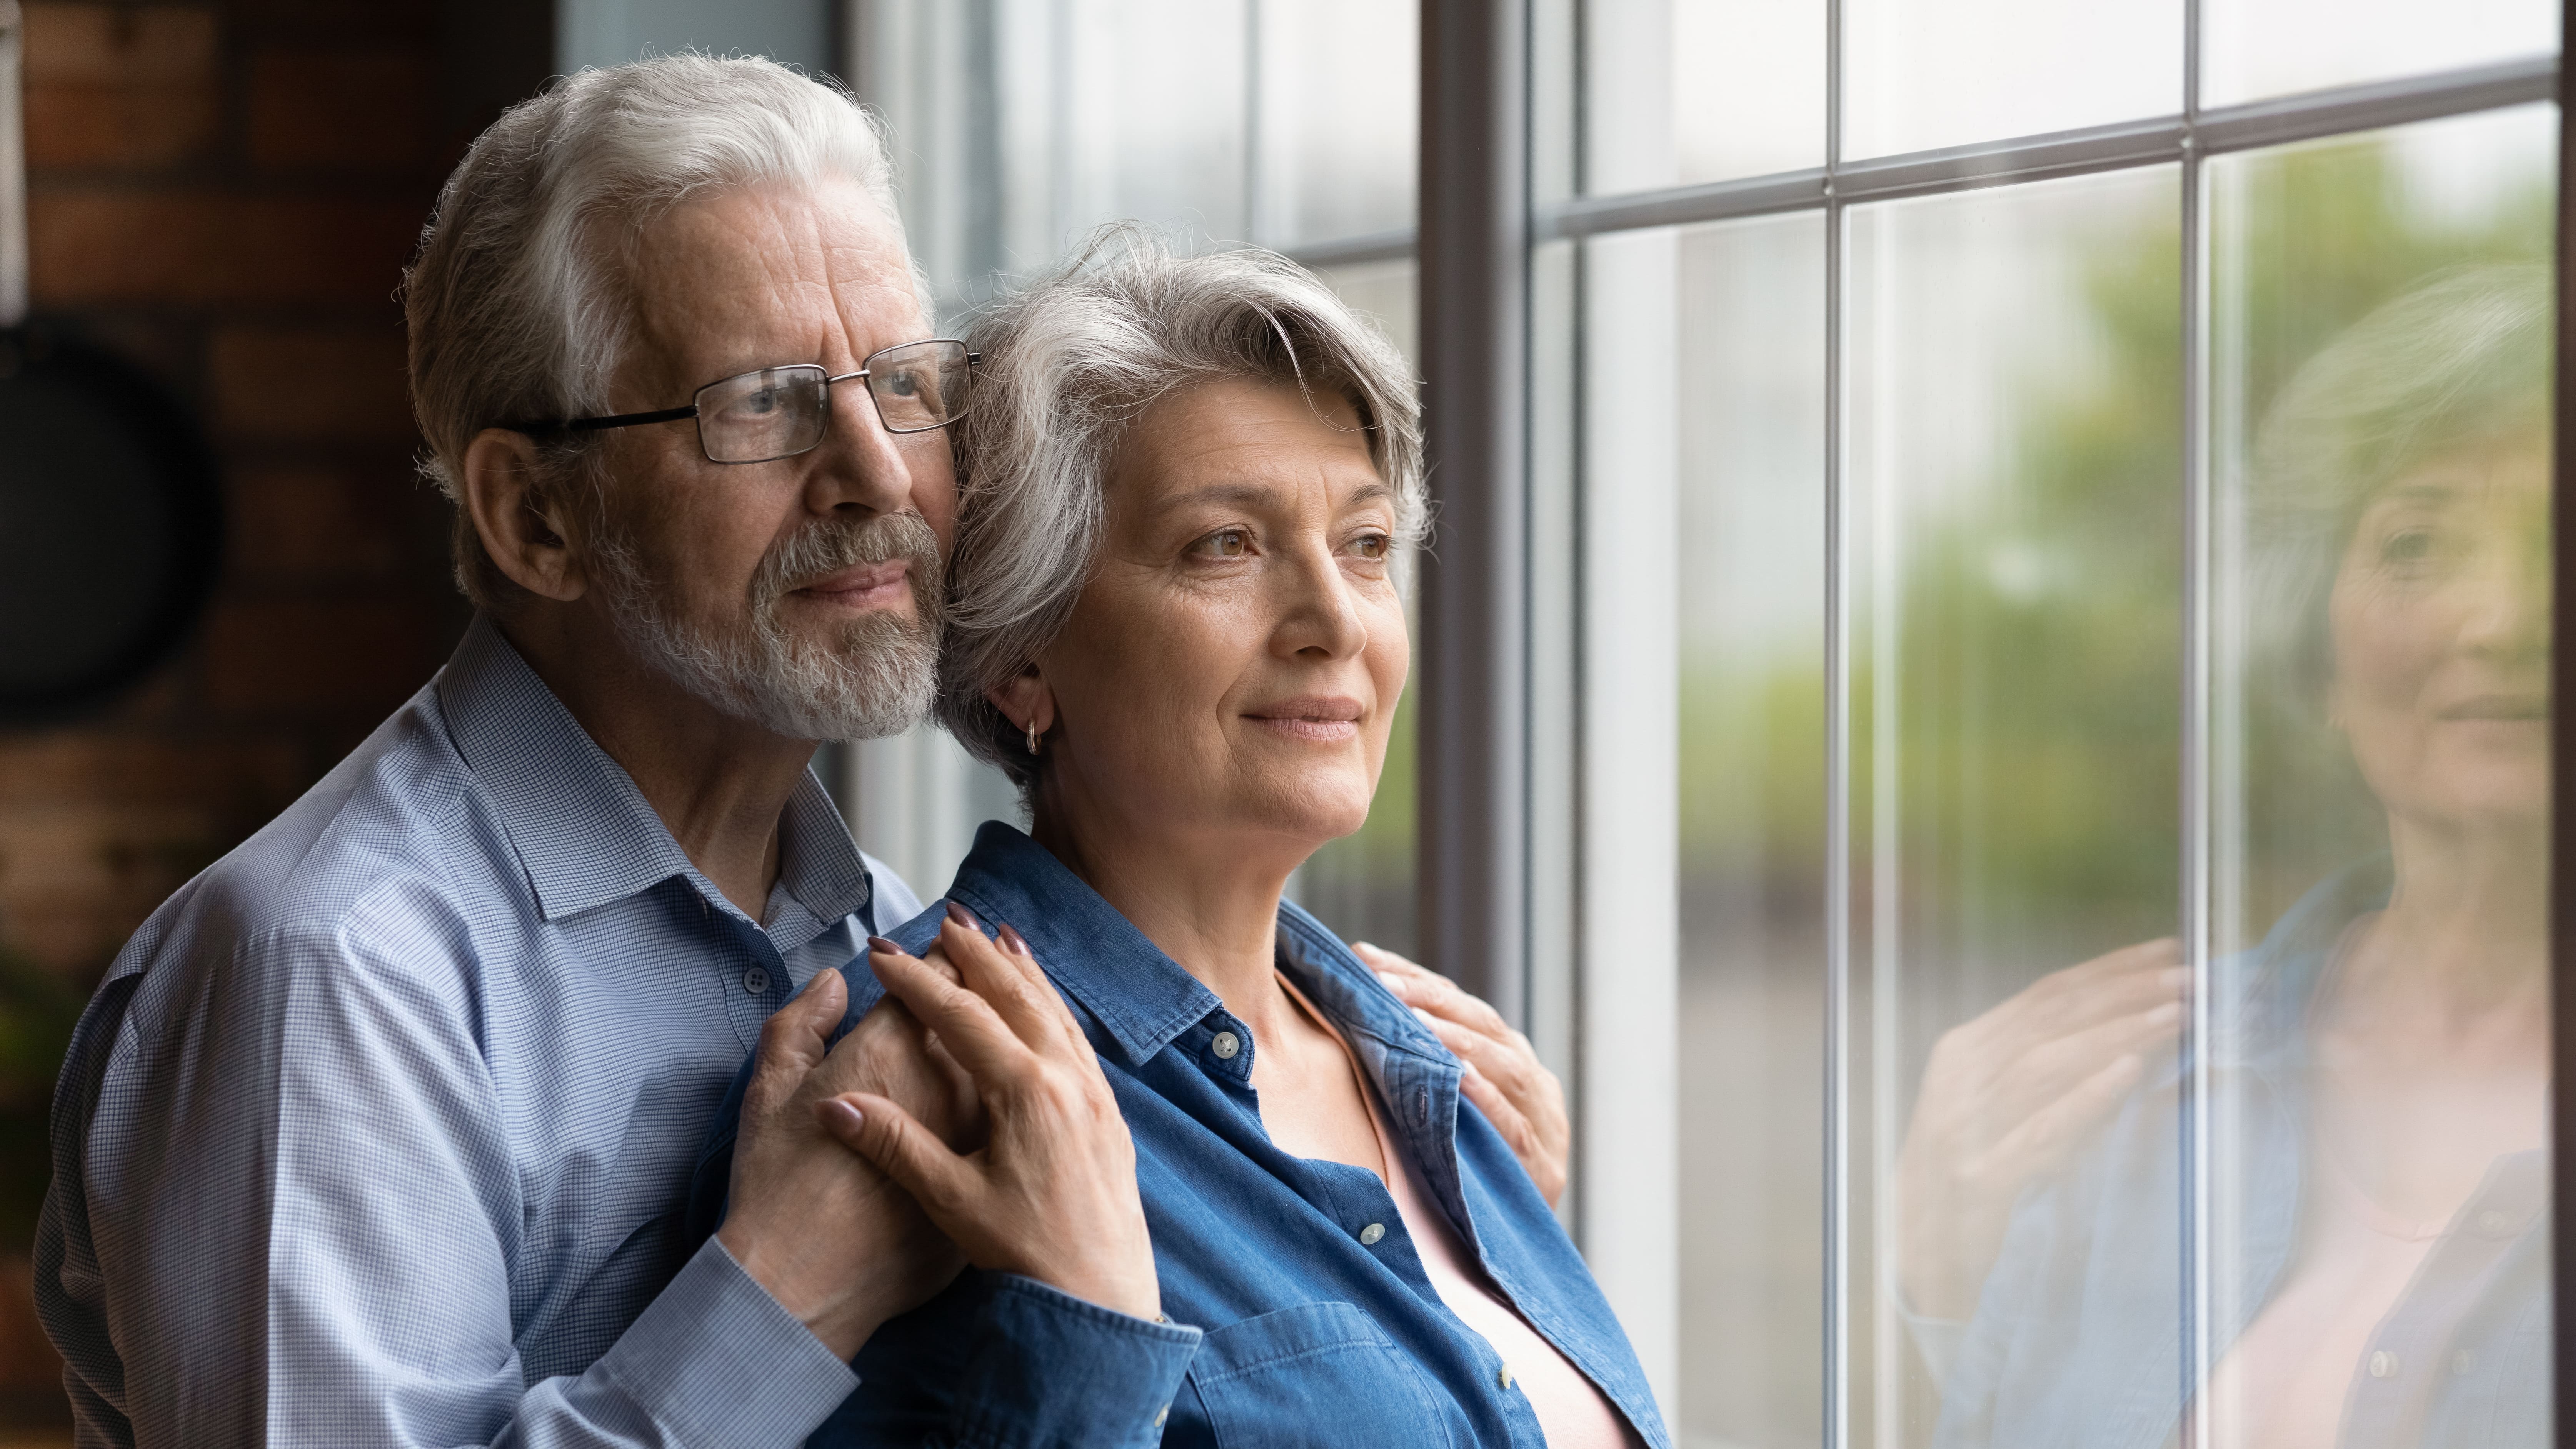 An older couple gazing out of a window together while embracing